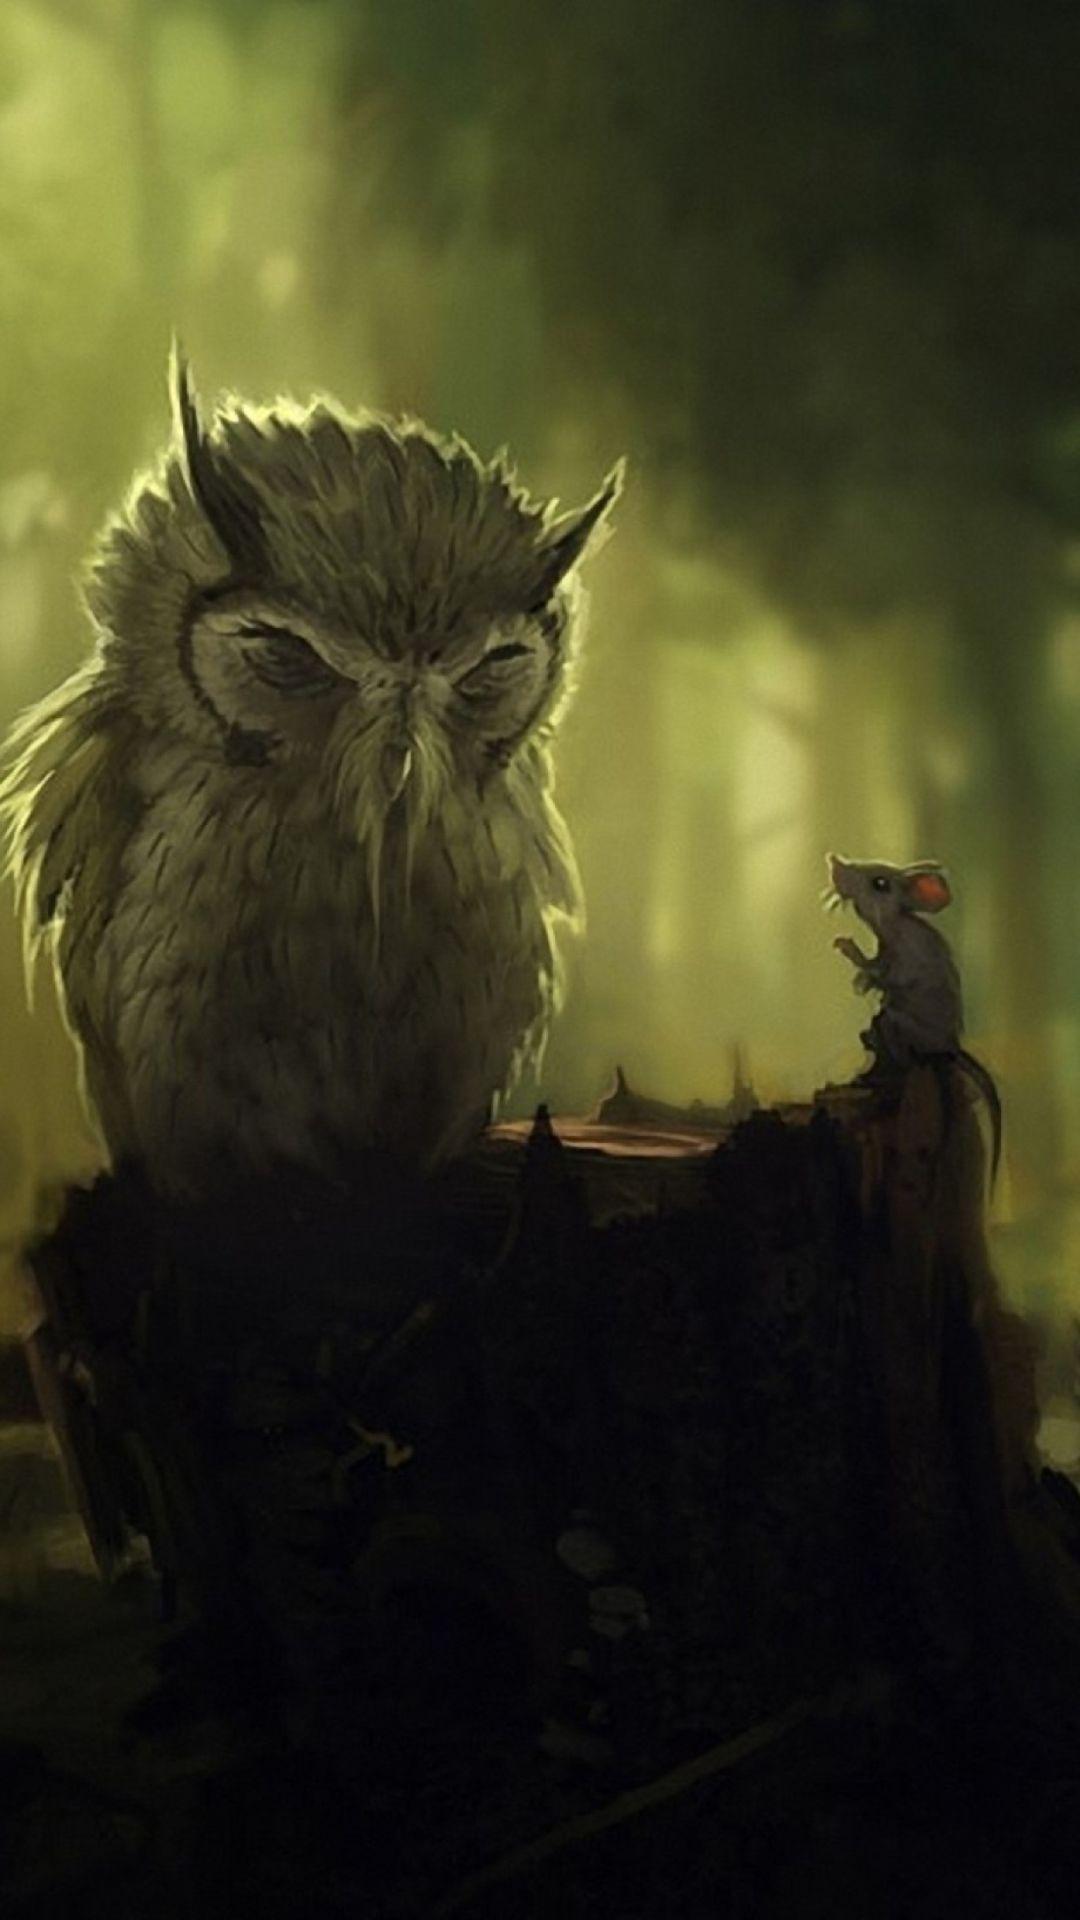 Wallpaper.wiki Cute Owl Wallpaper Widescreen For Android PIC